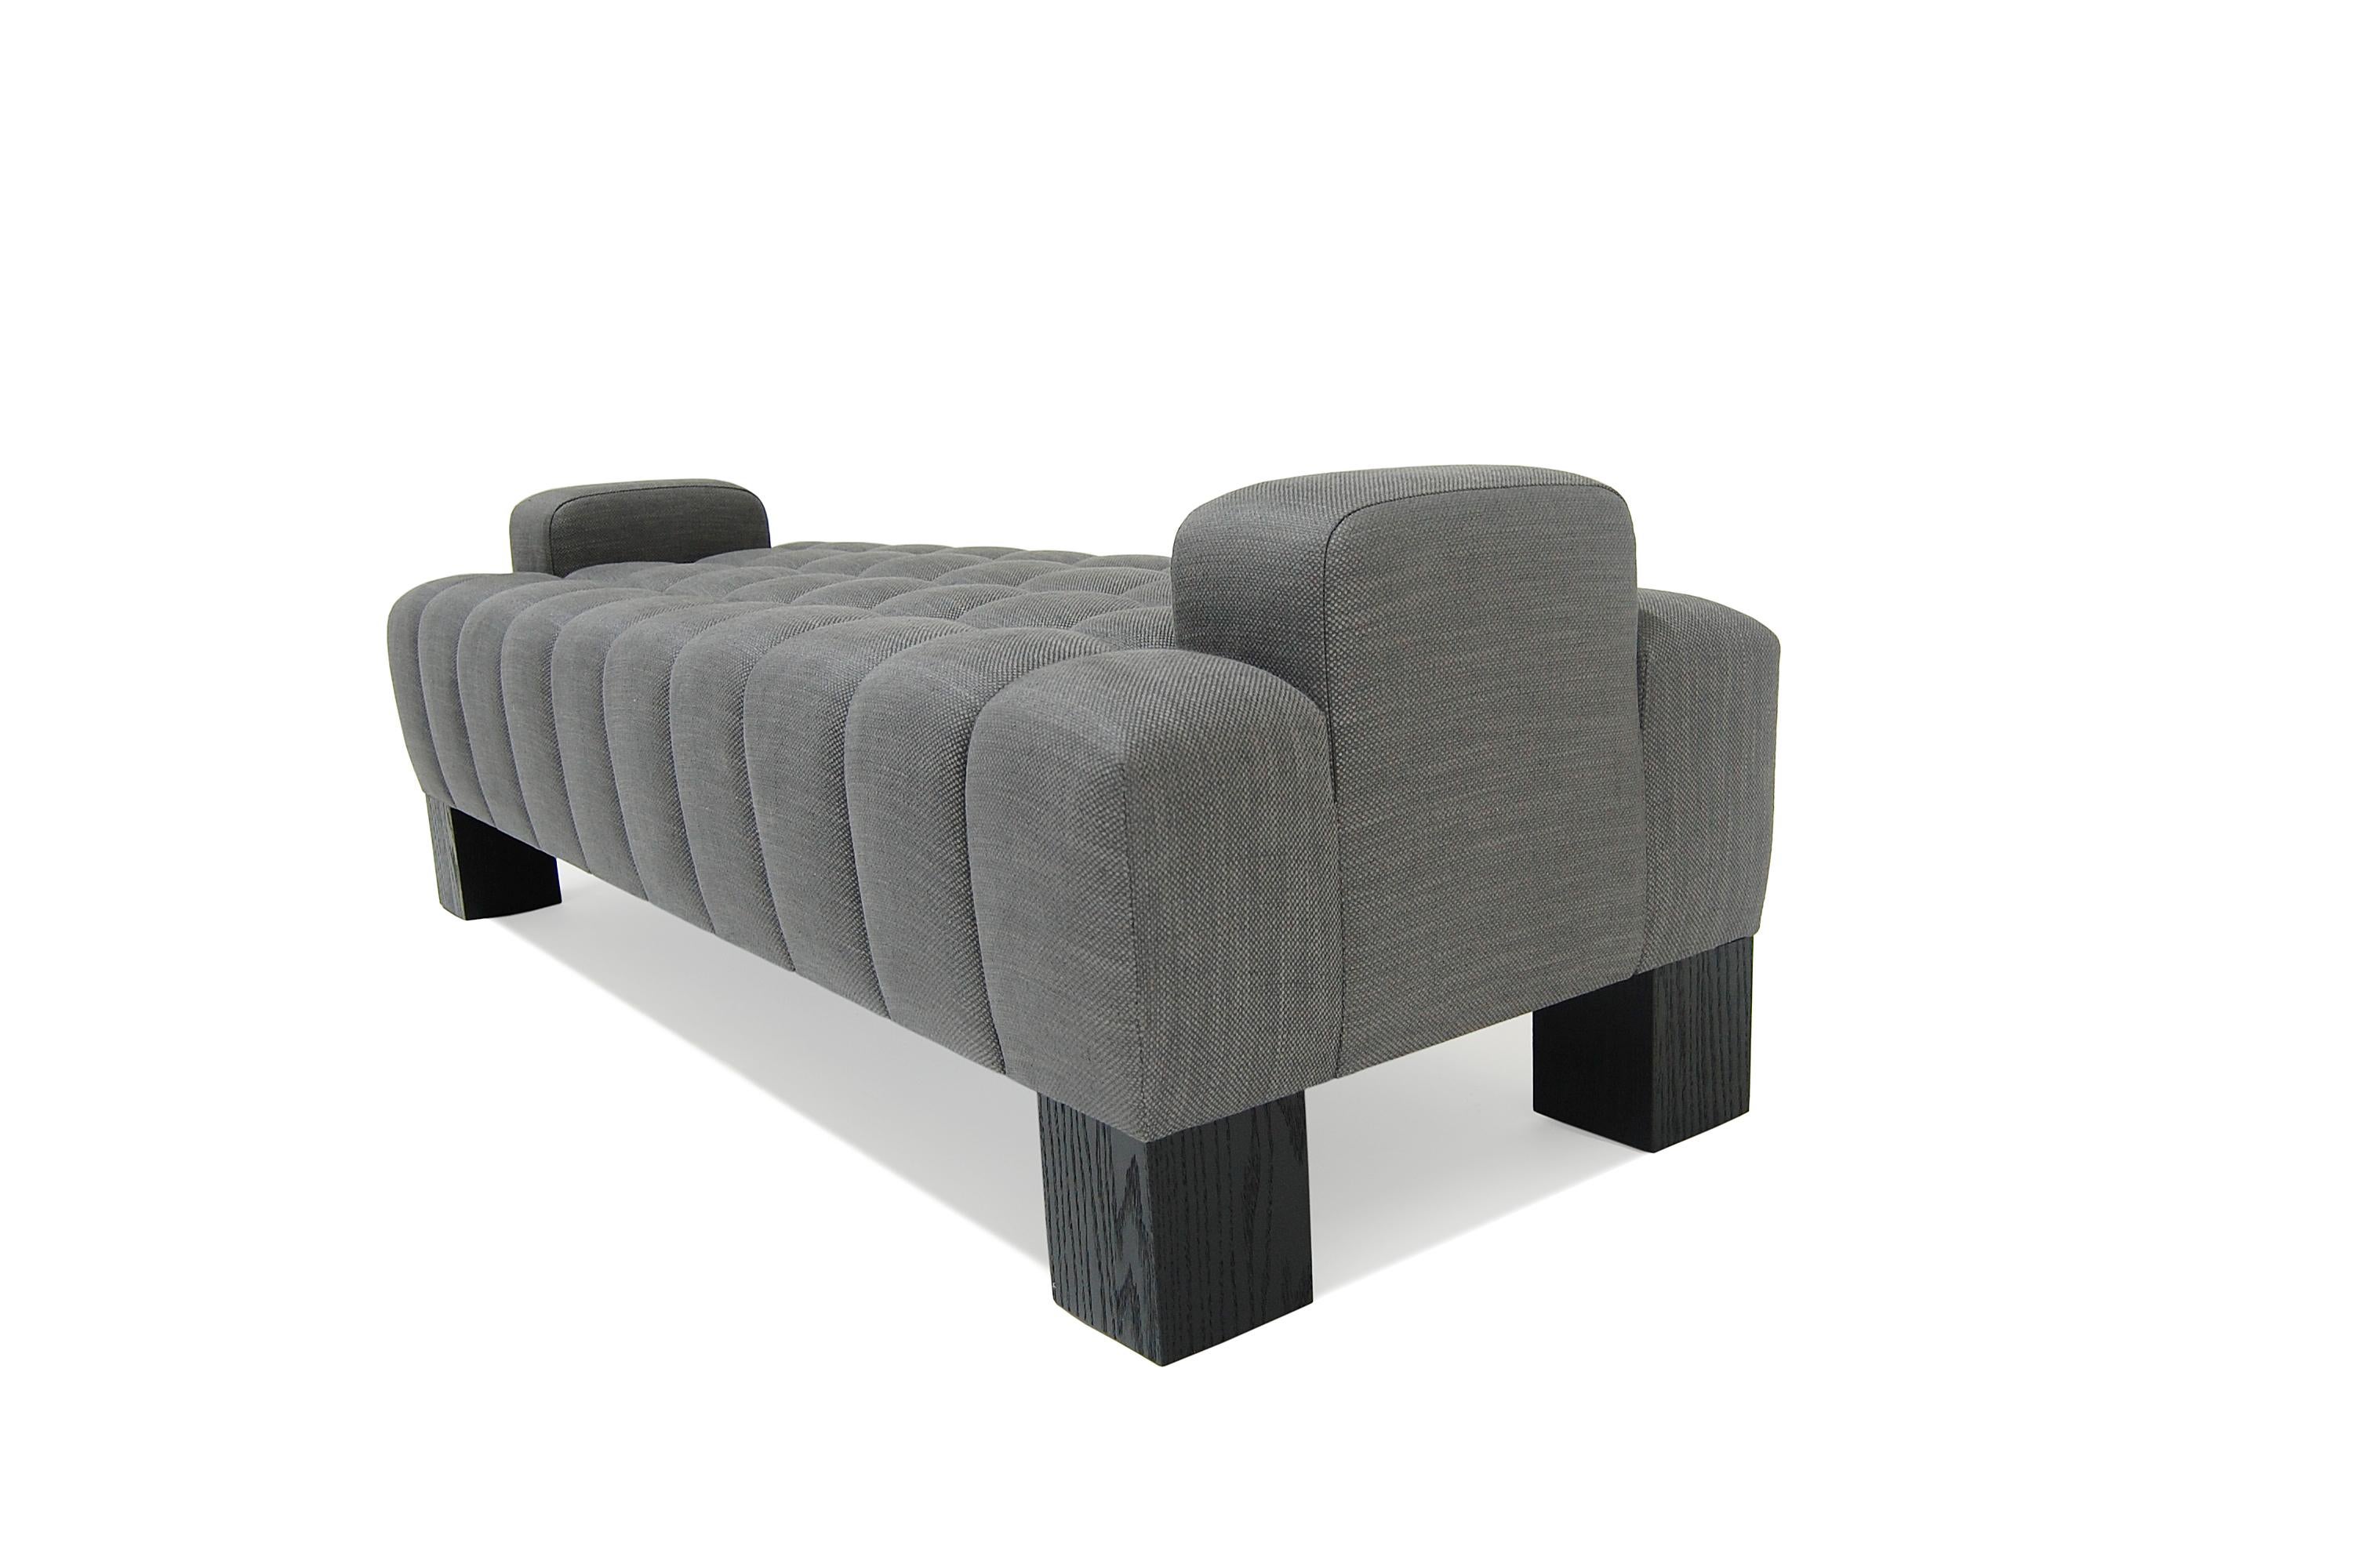 Abyss Bench with Arms, Deep Tufted, Oak Wood Block Legs, Custom, Buttons, Fabric In New Condition For Sale In Ridgewood, NY